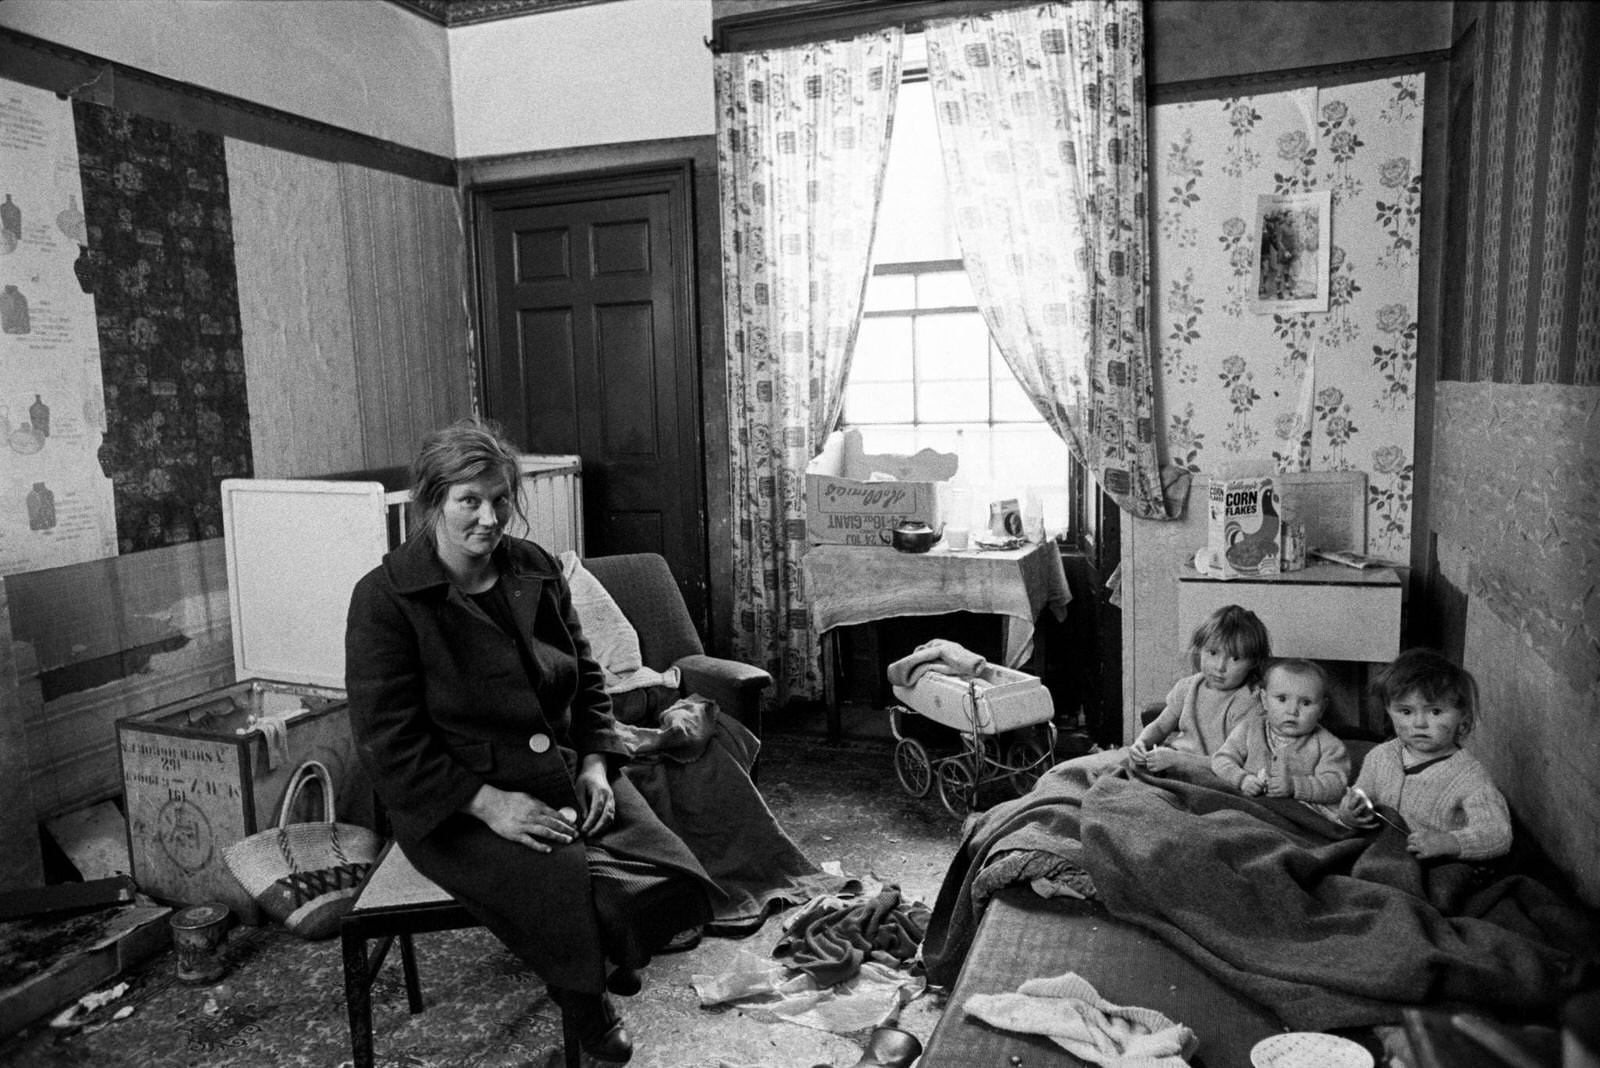 A mother and three little children in the interior of their flat in the notorious Gorbals district of Glasgow, 1969.